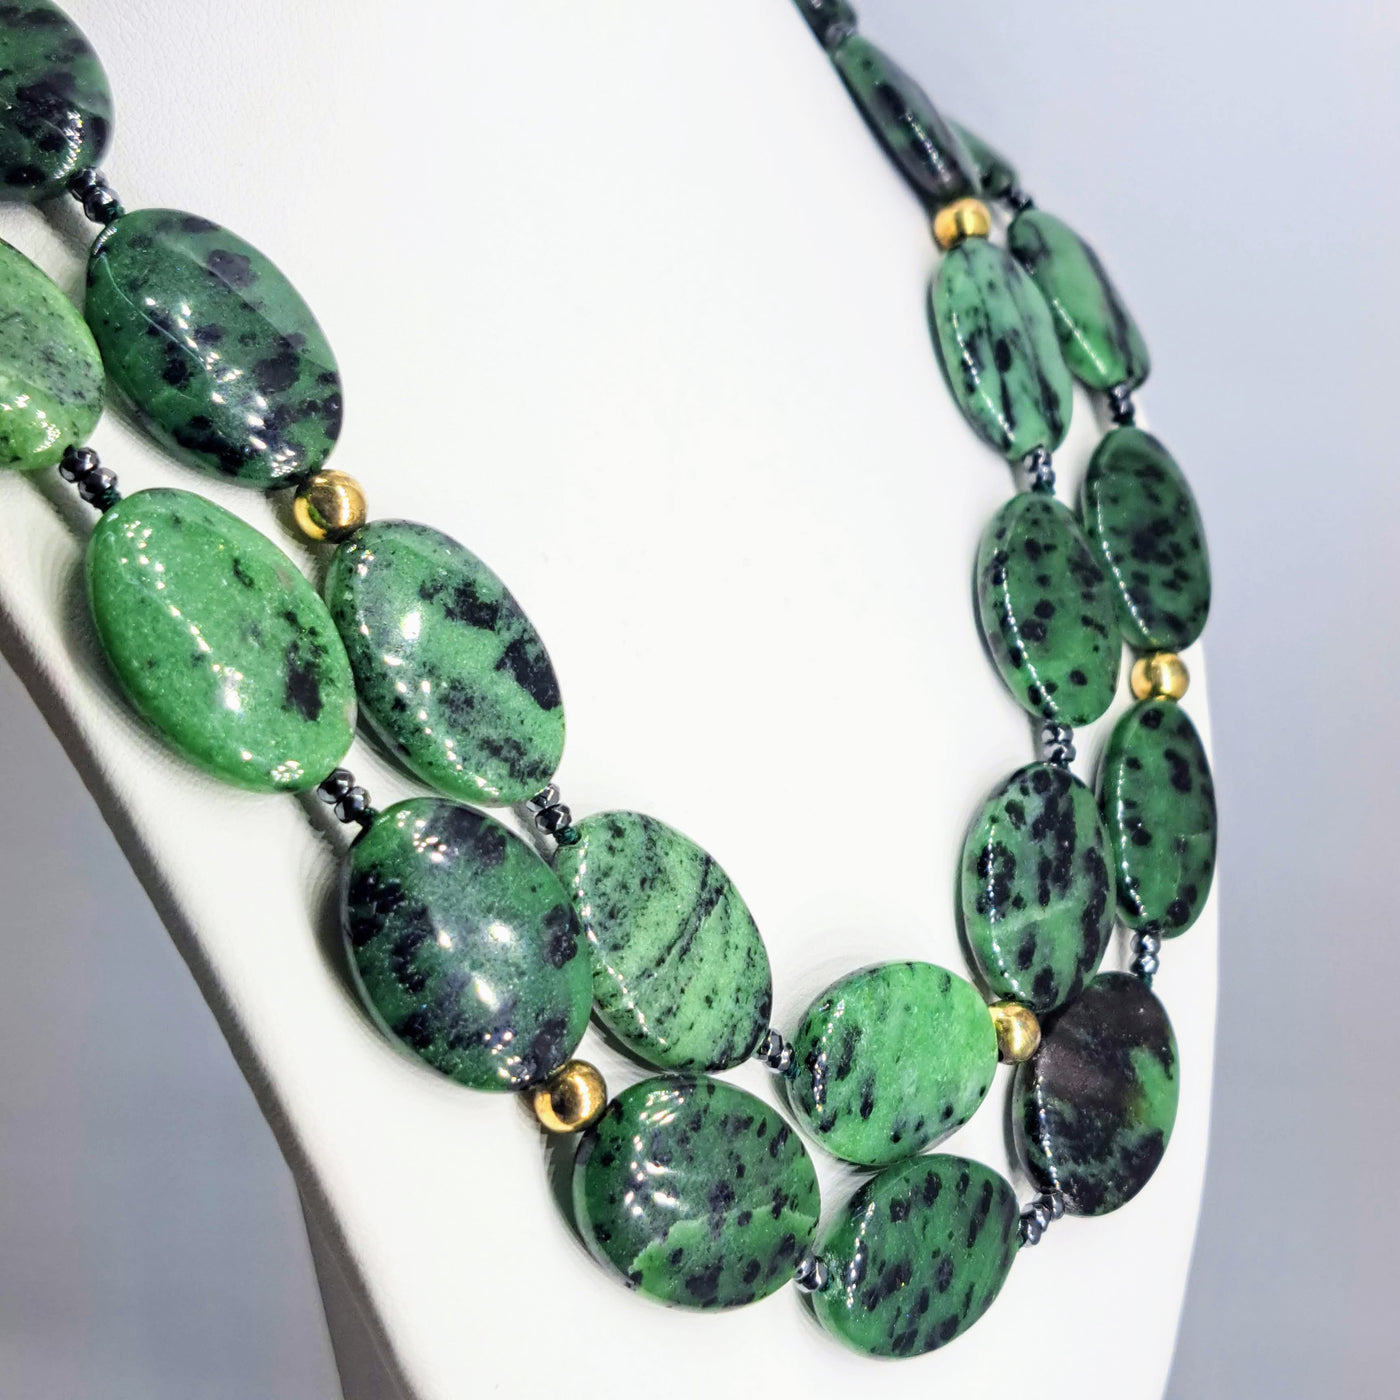 "Zoisite - ALL Right!" 18"-20" Necklace - Green Ruby Zoisite, Hematite, Gold Sterling